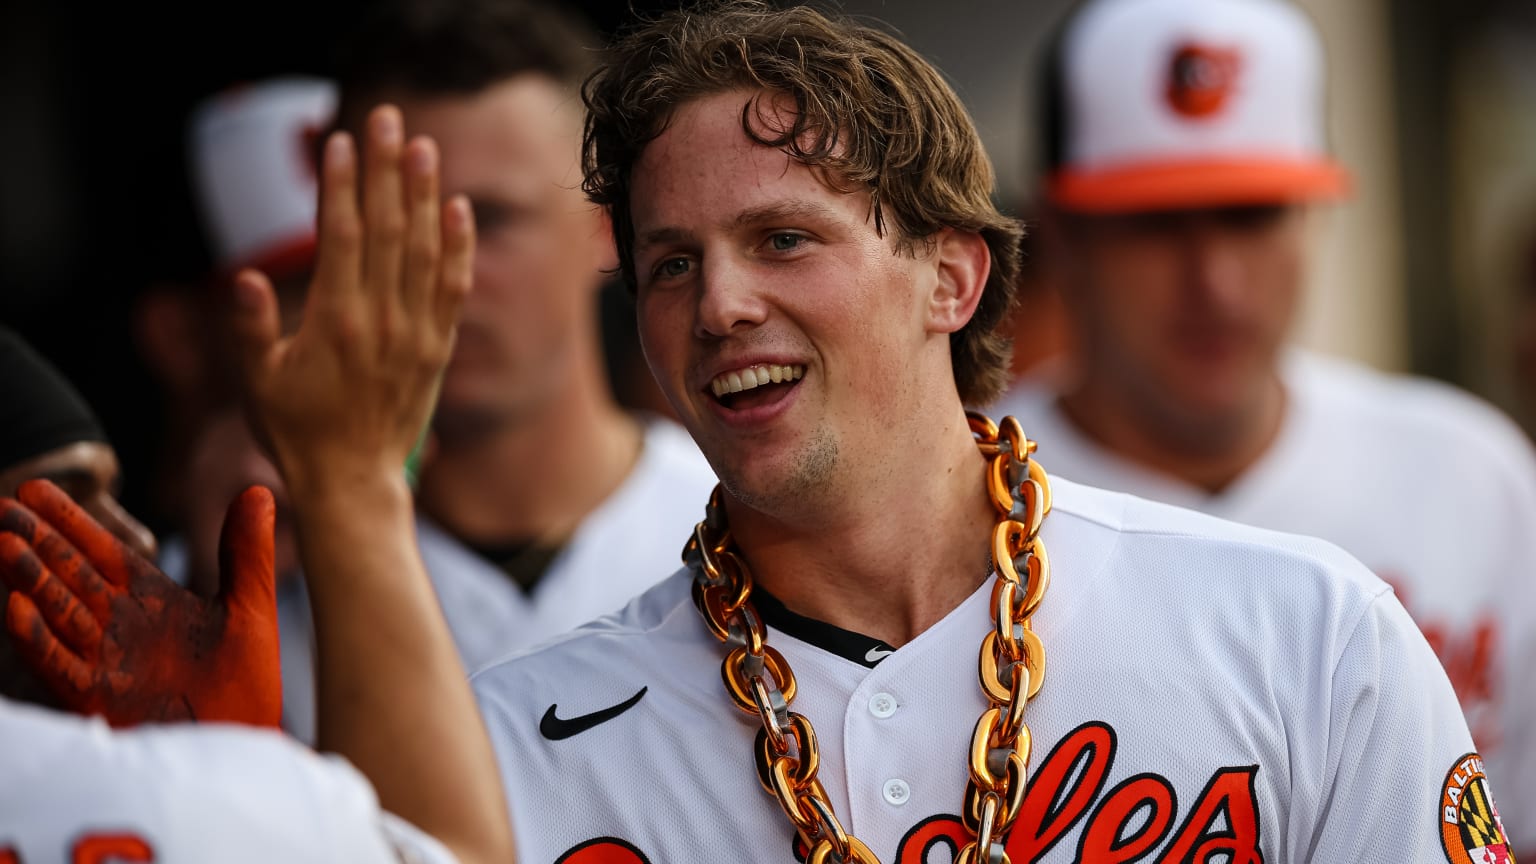 The Orioles' Adley Rutschman wears a large gold chain and high-fives a teammate in the dugout